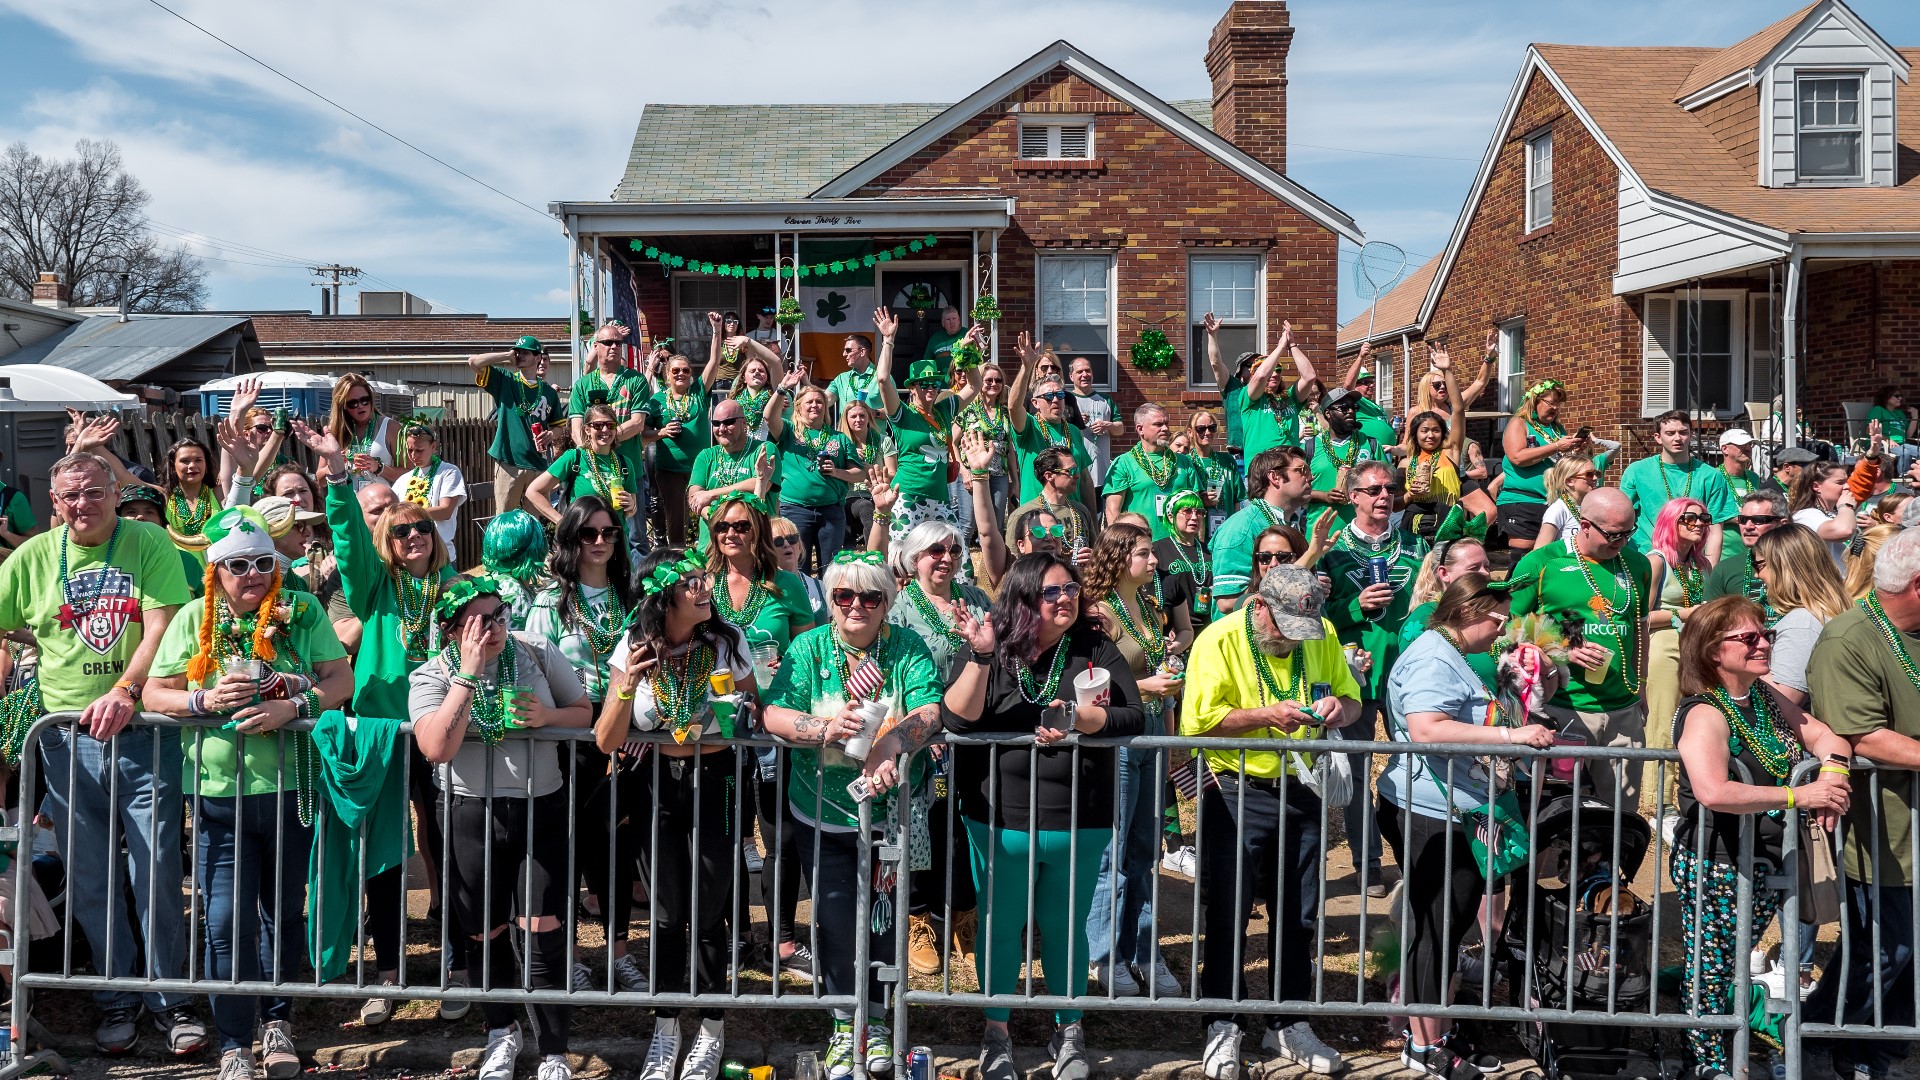 Thousands of people will fill the streets of Dogtown on Friday for the annual St. Patrick's Day Parade. Here's everything you need to know about the festivities.